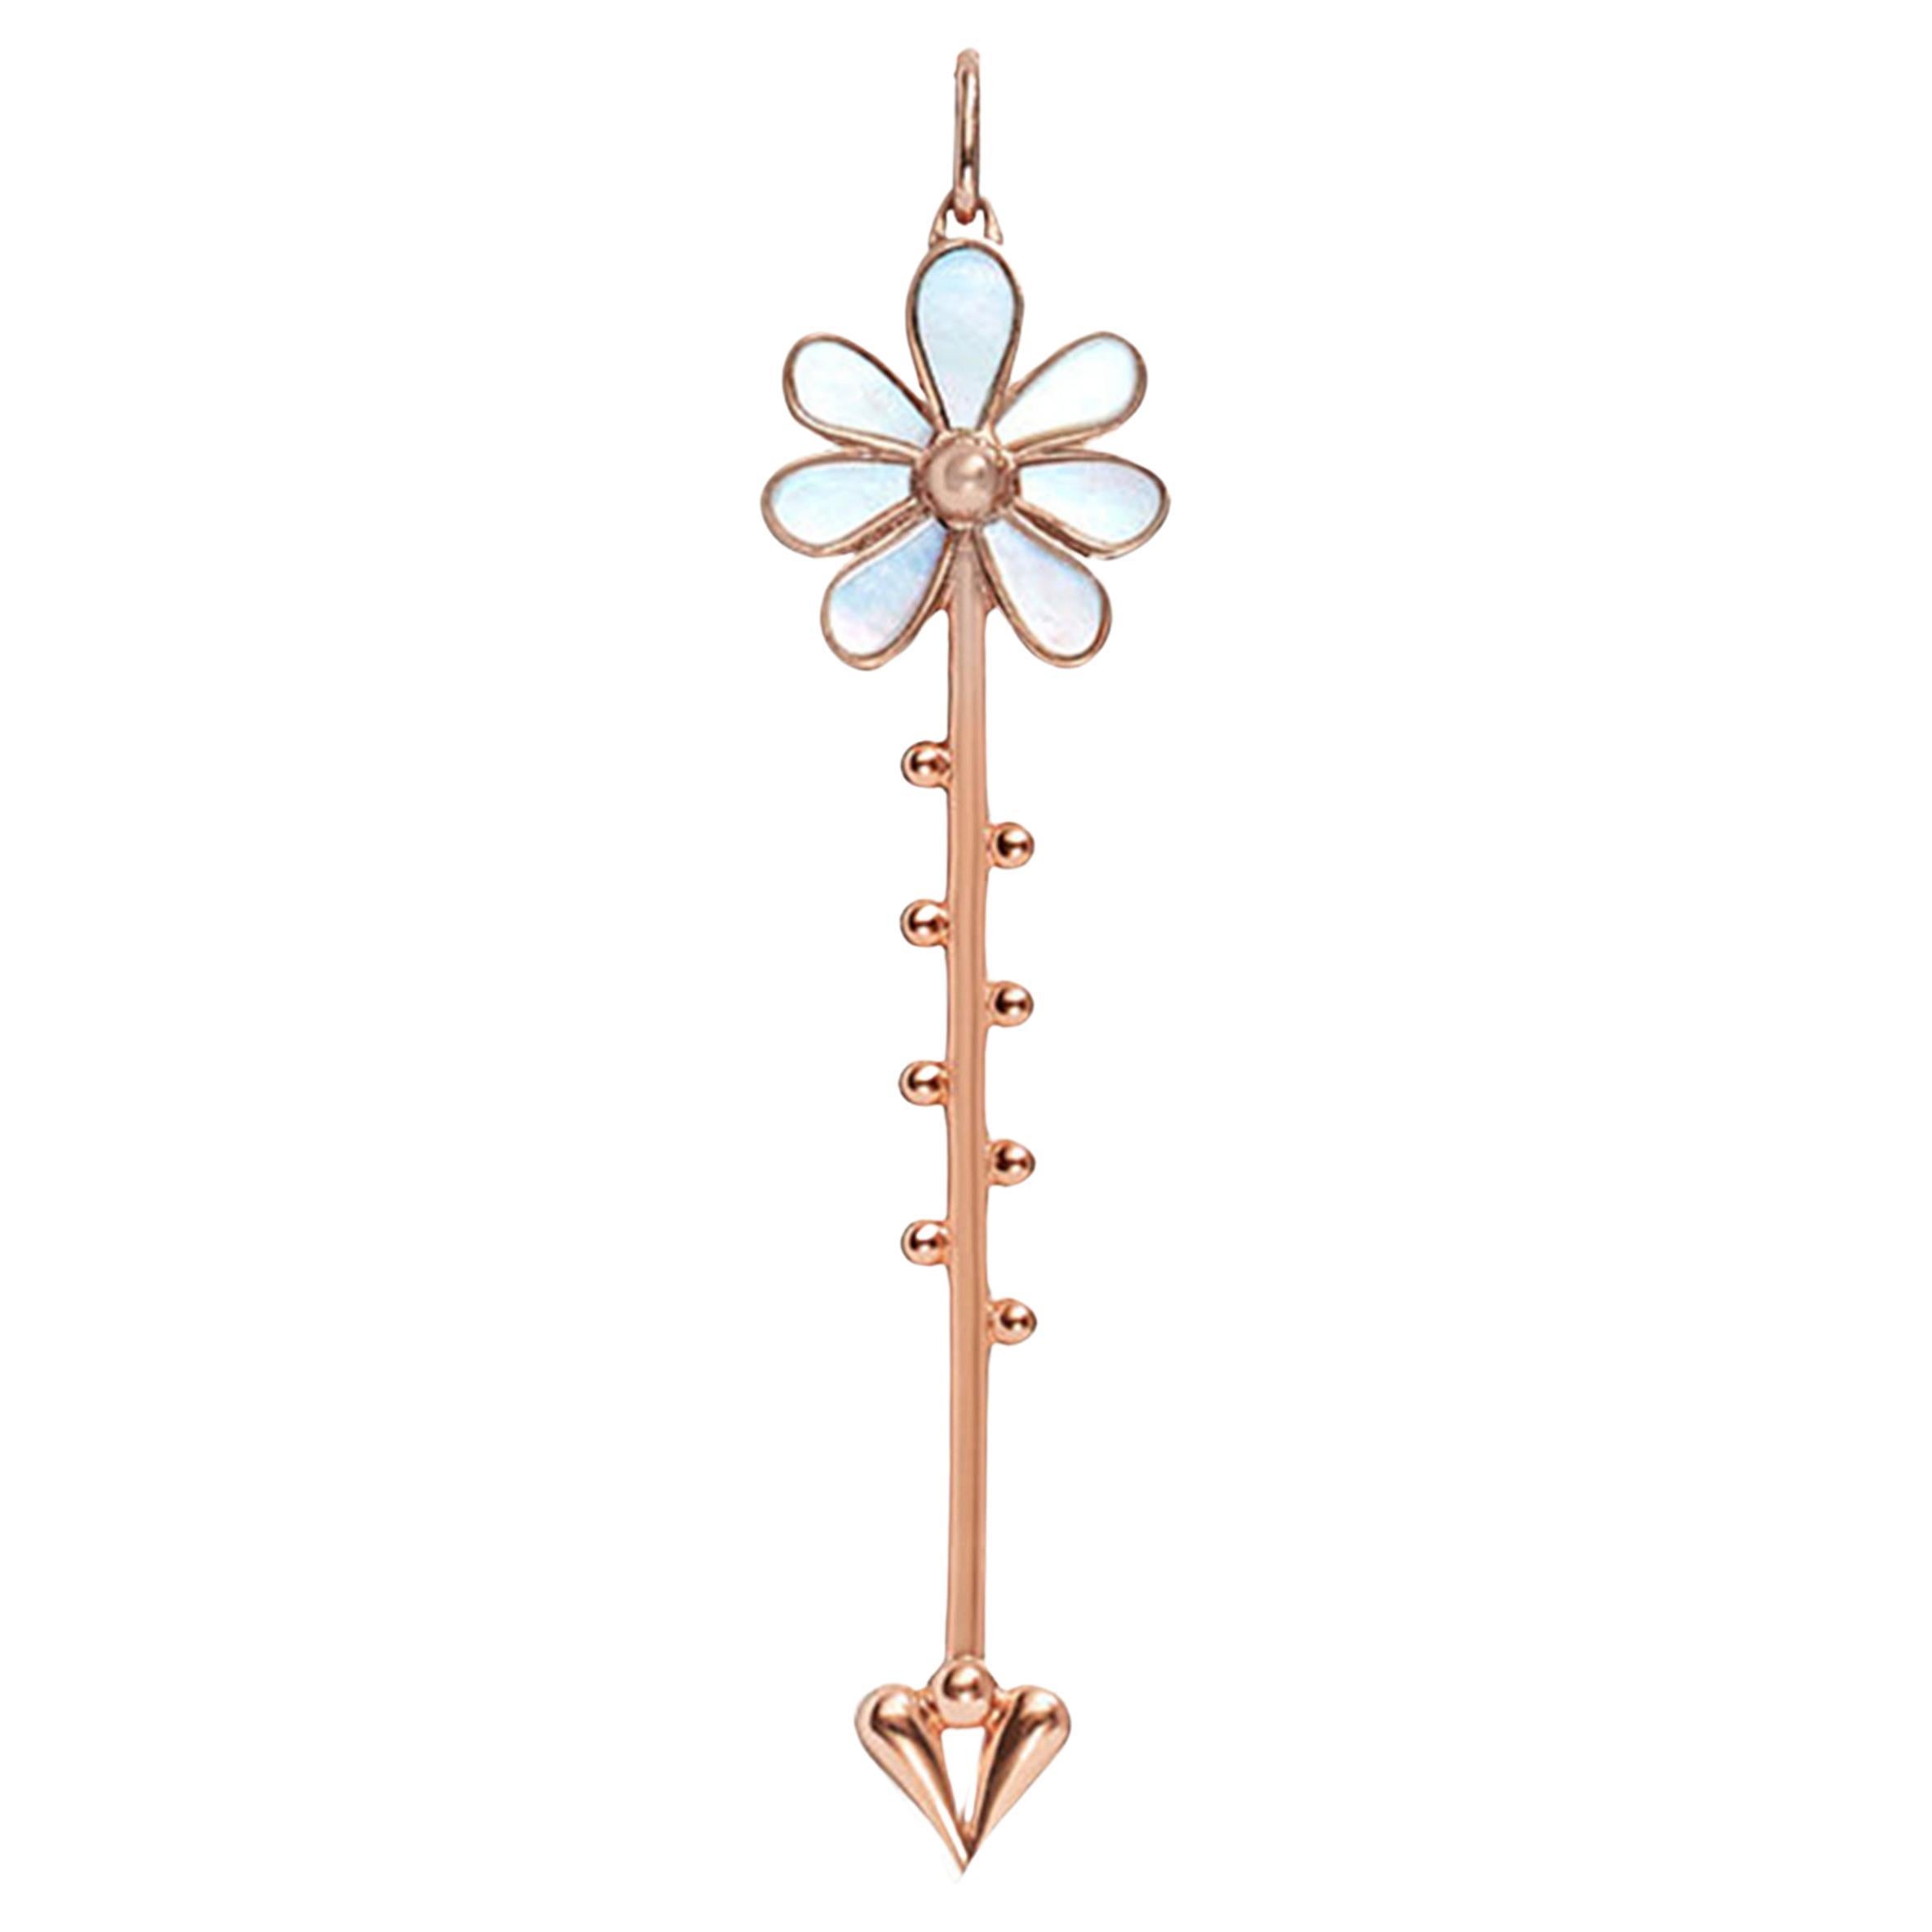 Roseate Jewelry Bloom Wand Pendant in 18k Rose Gold and Mother-of-Pearl